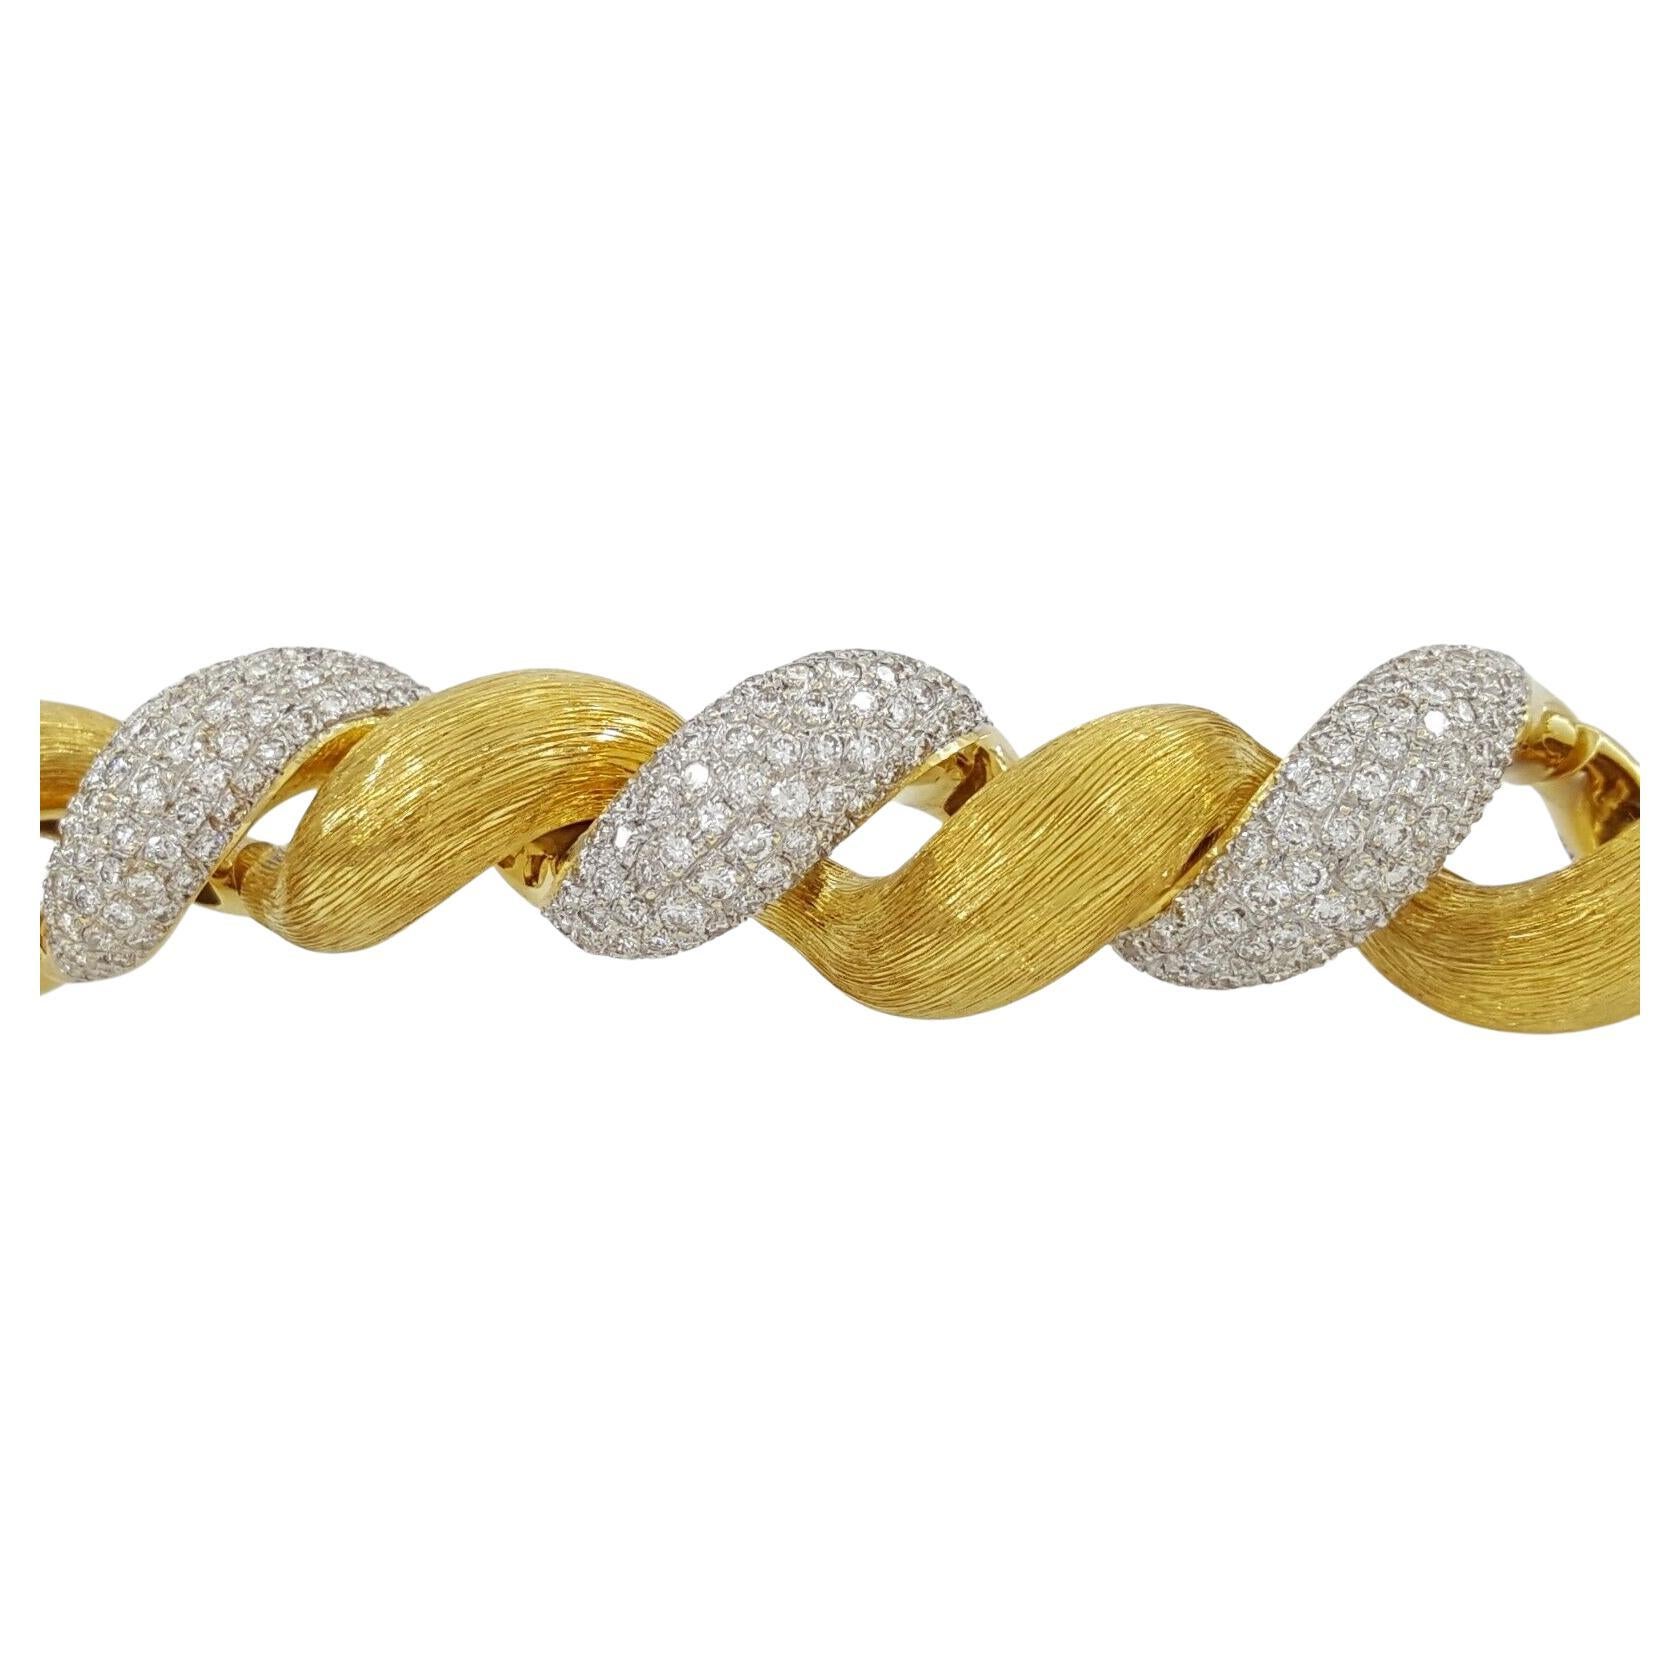 9 ct total weight Round Diamond Cuff Bangle Bracelet. 

The bracelet weighs 67.8 grams, 6.8 inches long (fits medium size wrist), contains 664 Natural Round Brilliant Cut Diamonds weighing approximately 9 ct total weight, G-H in Color, VS-SI in